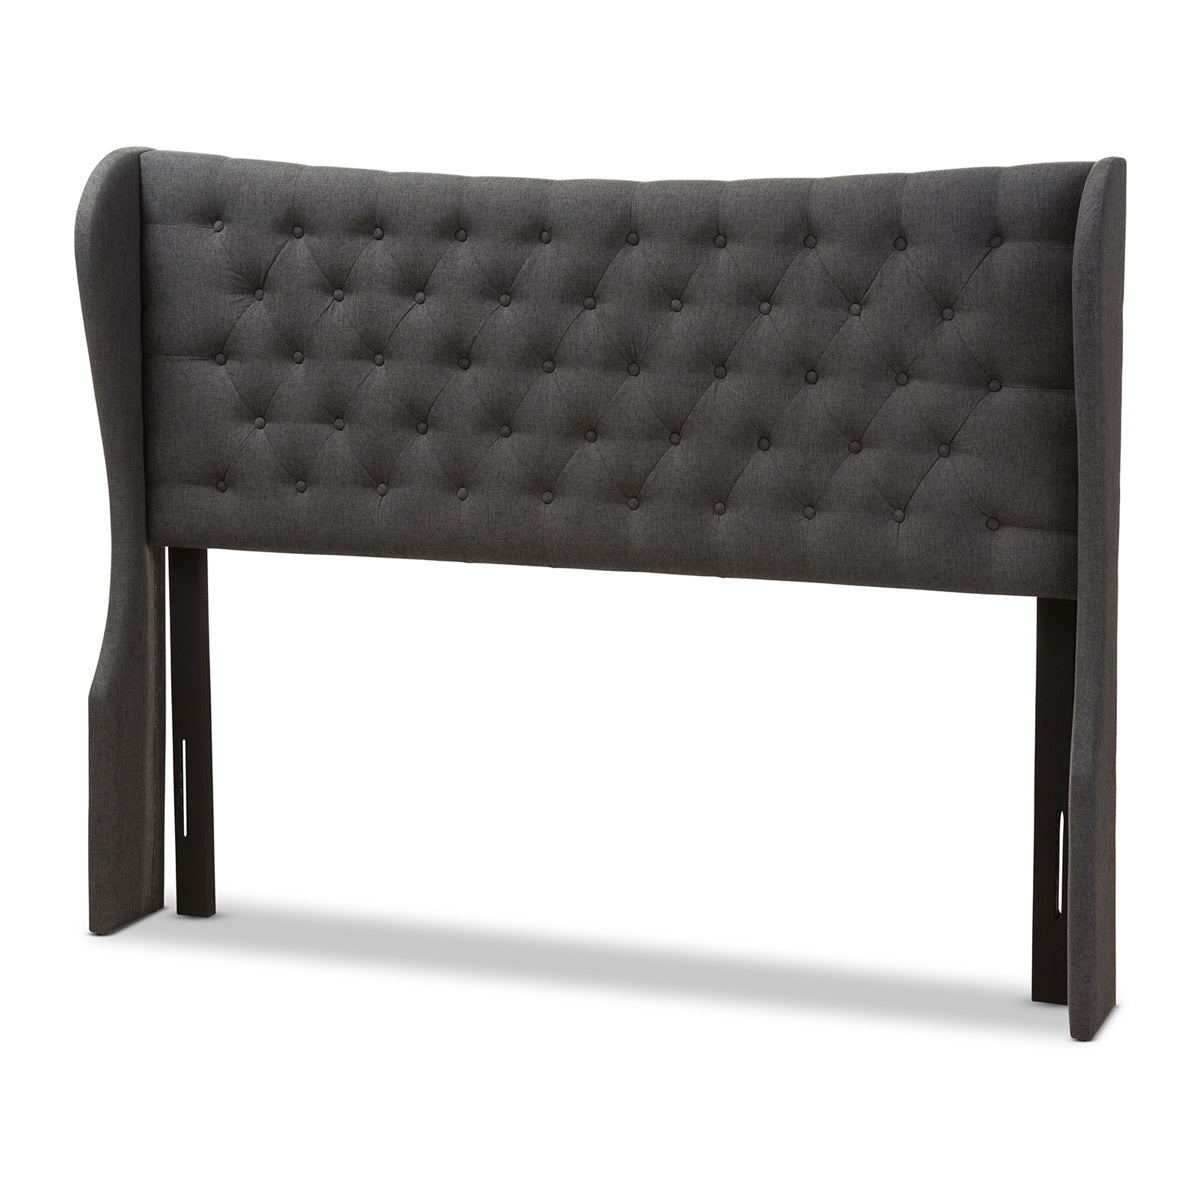 Baxton Studio Cadence Modern and Contemporary Dark Grey Fabric Button-Tufted King Size Winged Headboard Baxton Studio-Headboards-Minimal And Modern - 1